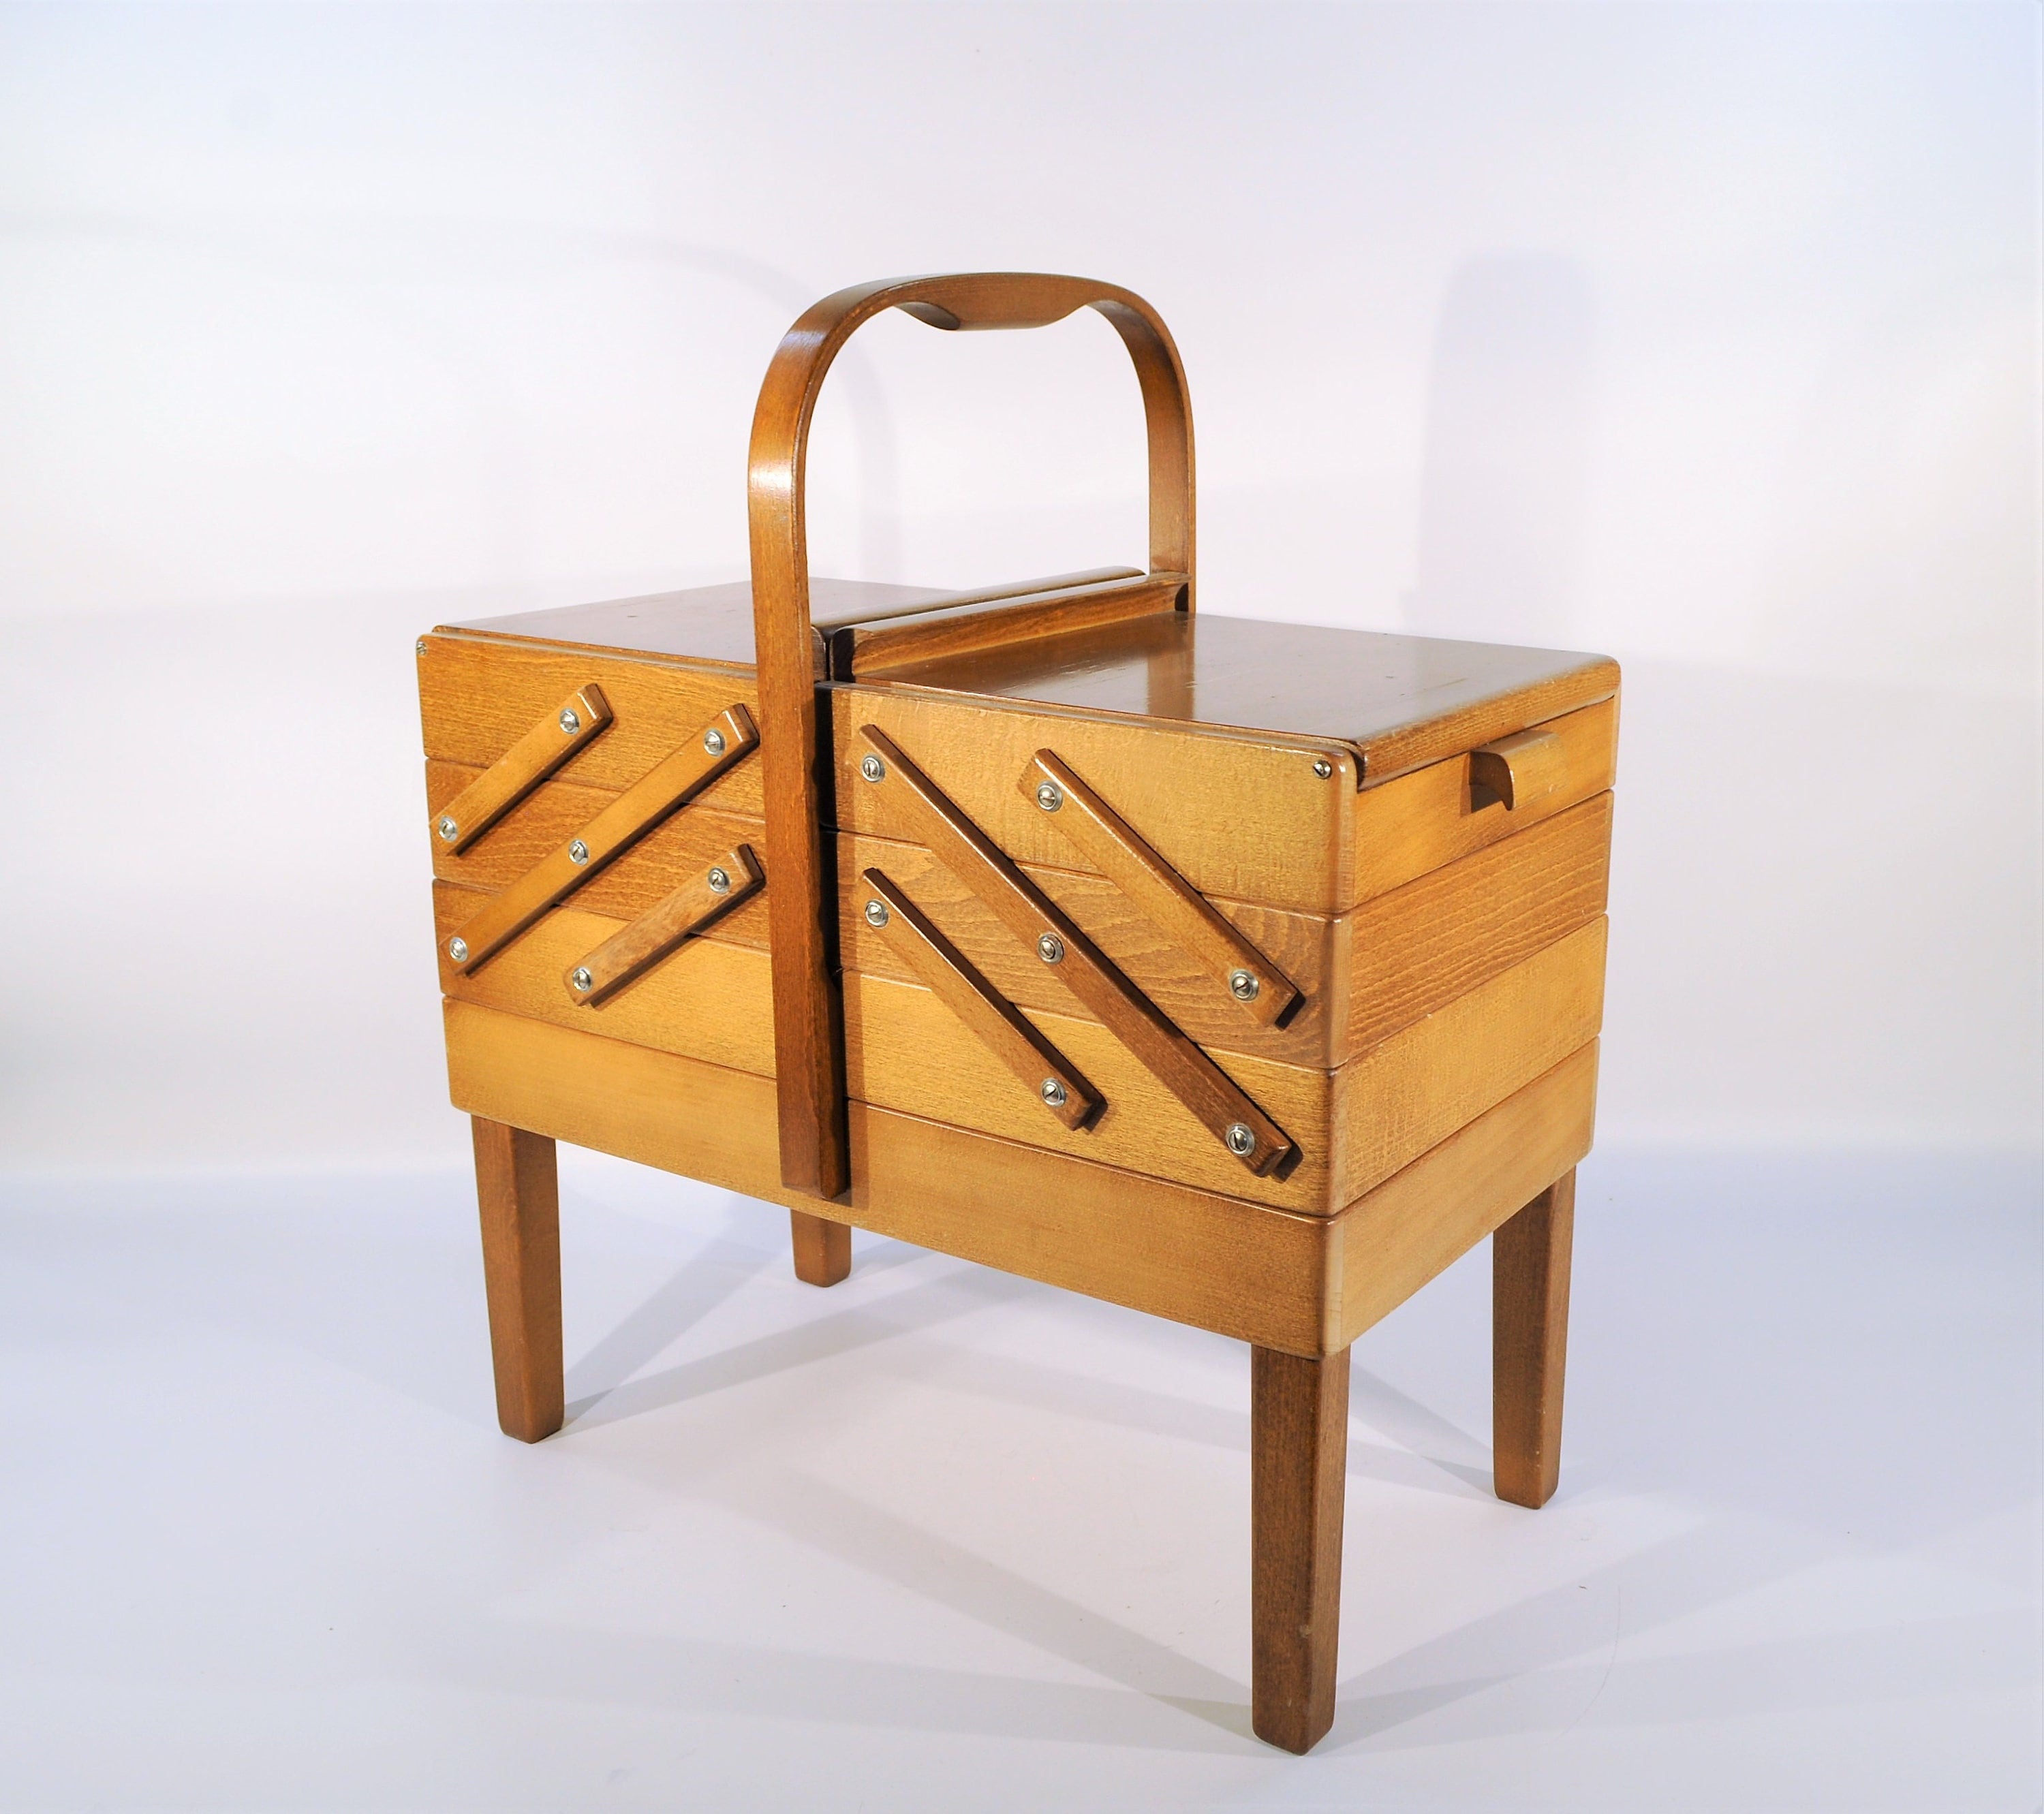 watch: Midcentury-style wooden sewing box - Retro to Go